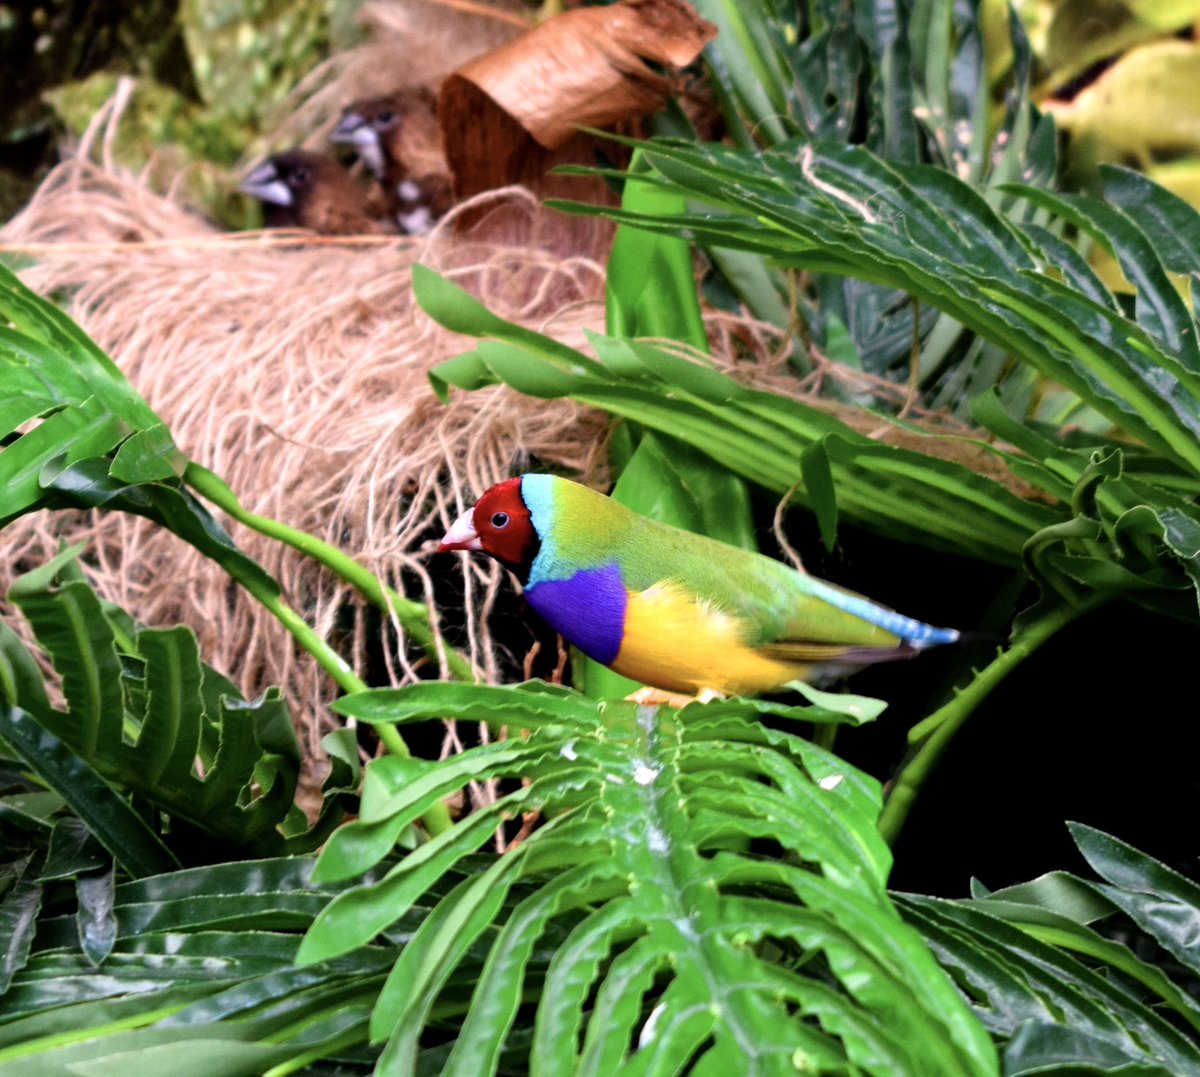 The endangered Lady Gouldian Finch is named in honour of Elizabeth Gould; illustrator, naturalist and wife of John “the birdman” Gould 🦜❤️

Photo: Kateryn Moroz

#Aves #BirdNames #BirdWatching #Birds